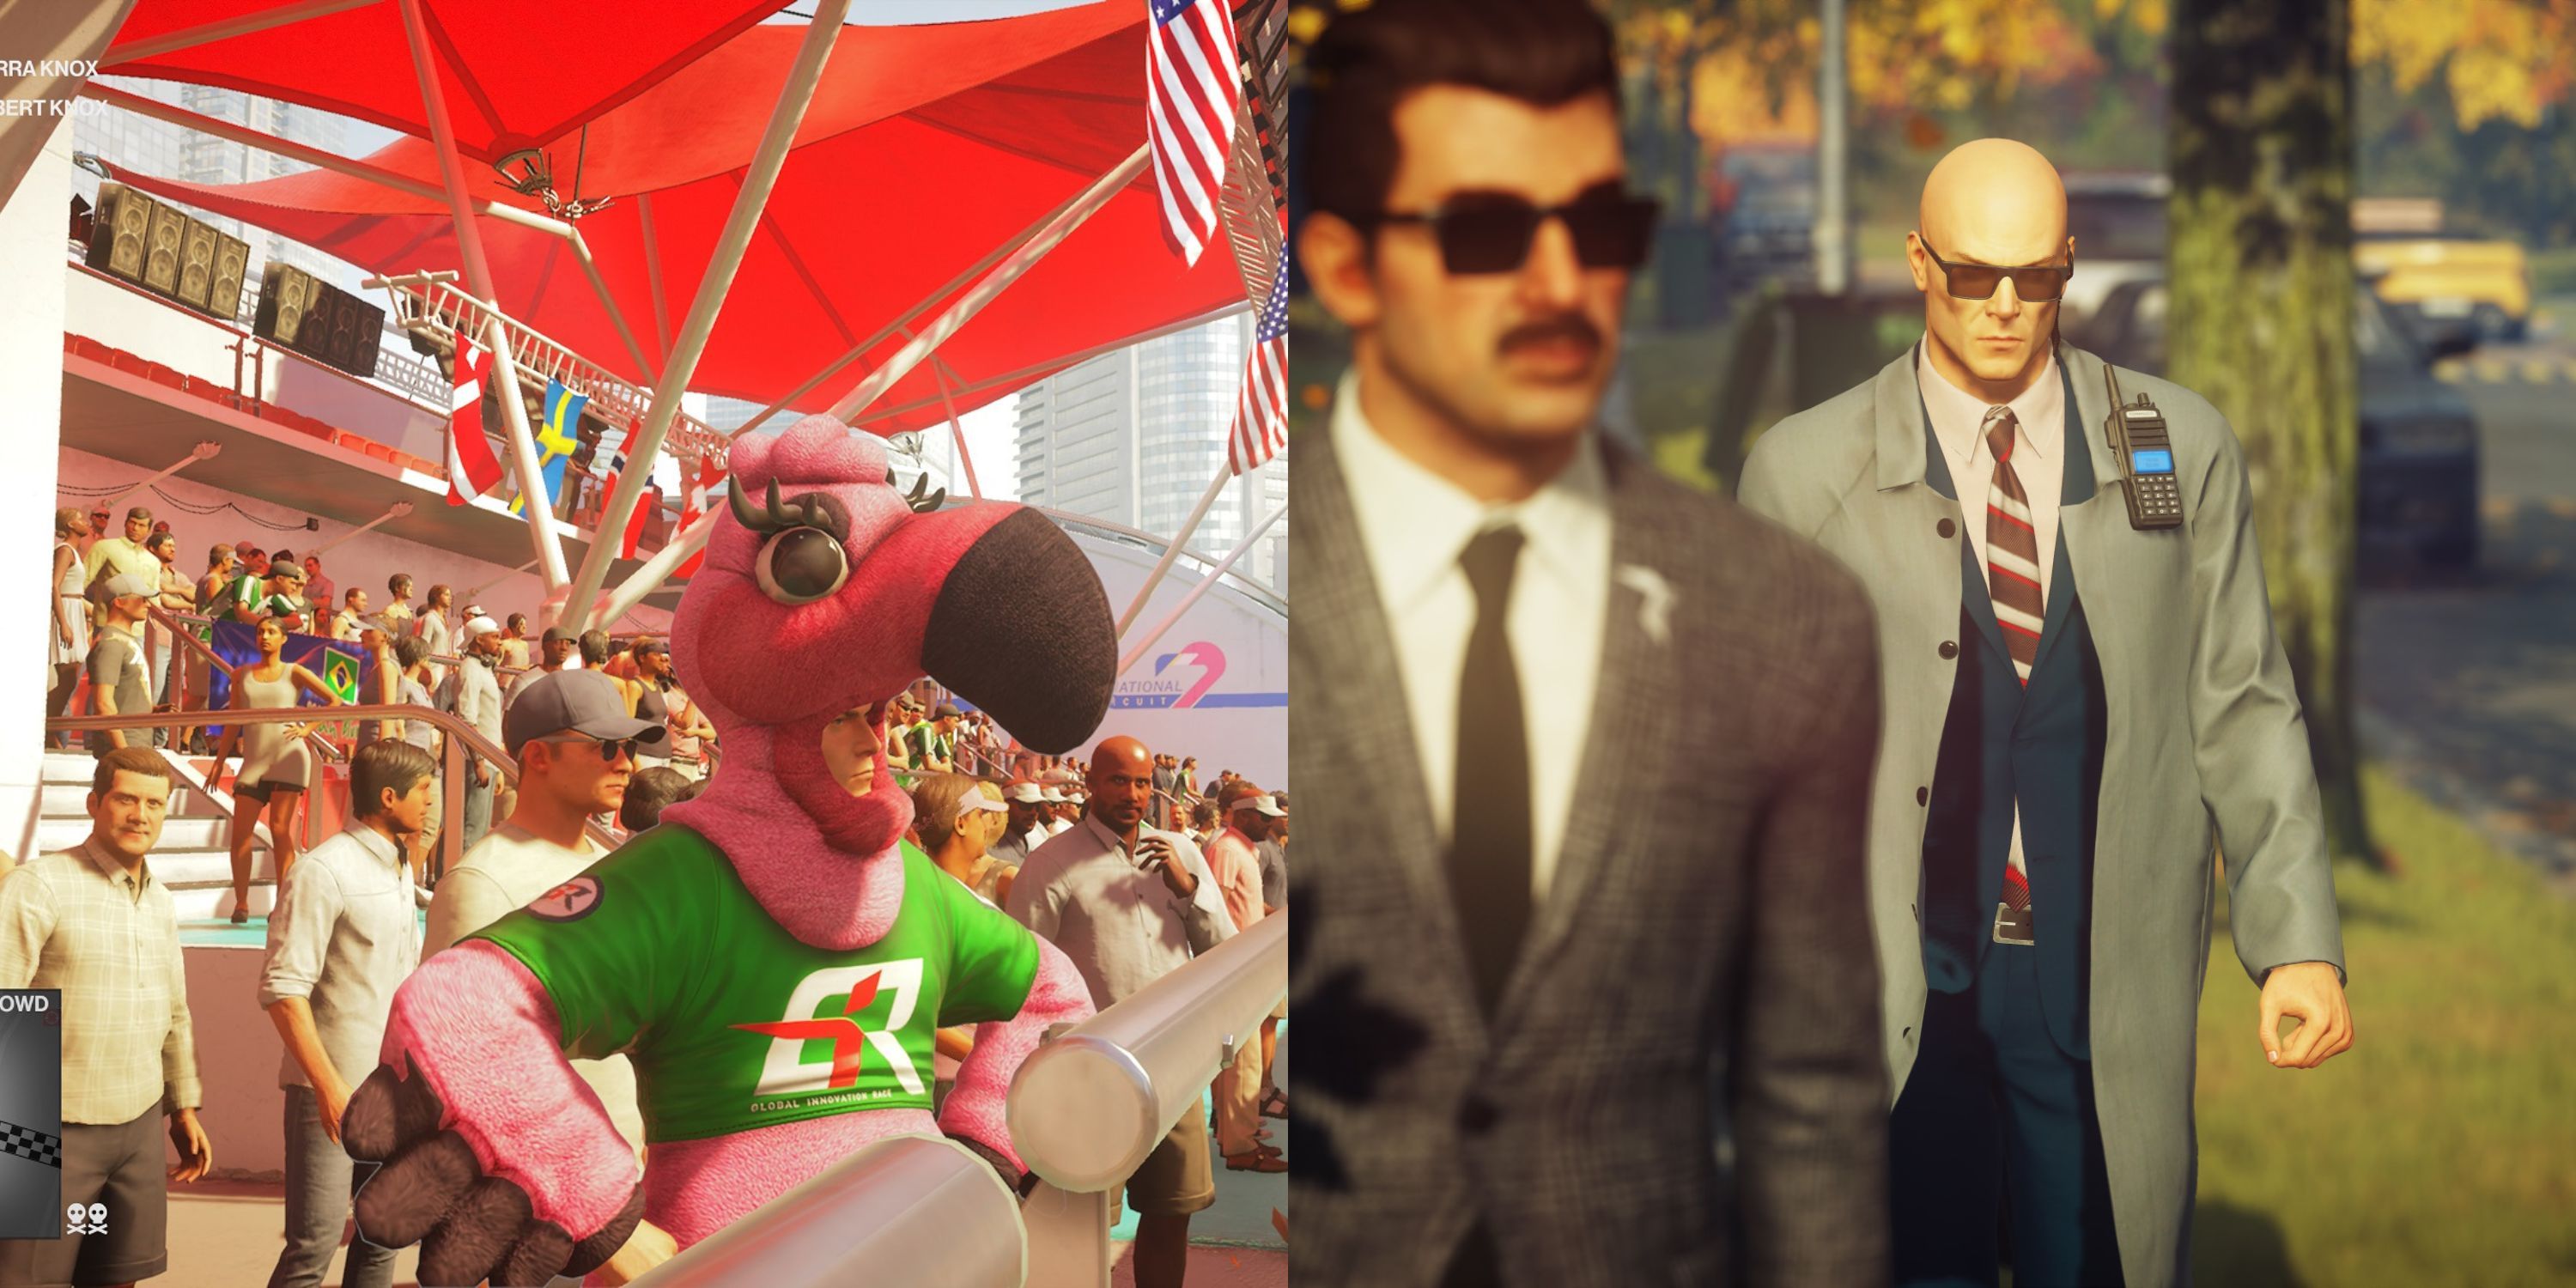 Featured image Agent 47 in a flamingo costume and tailing a target in Hitman 2